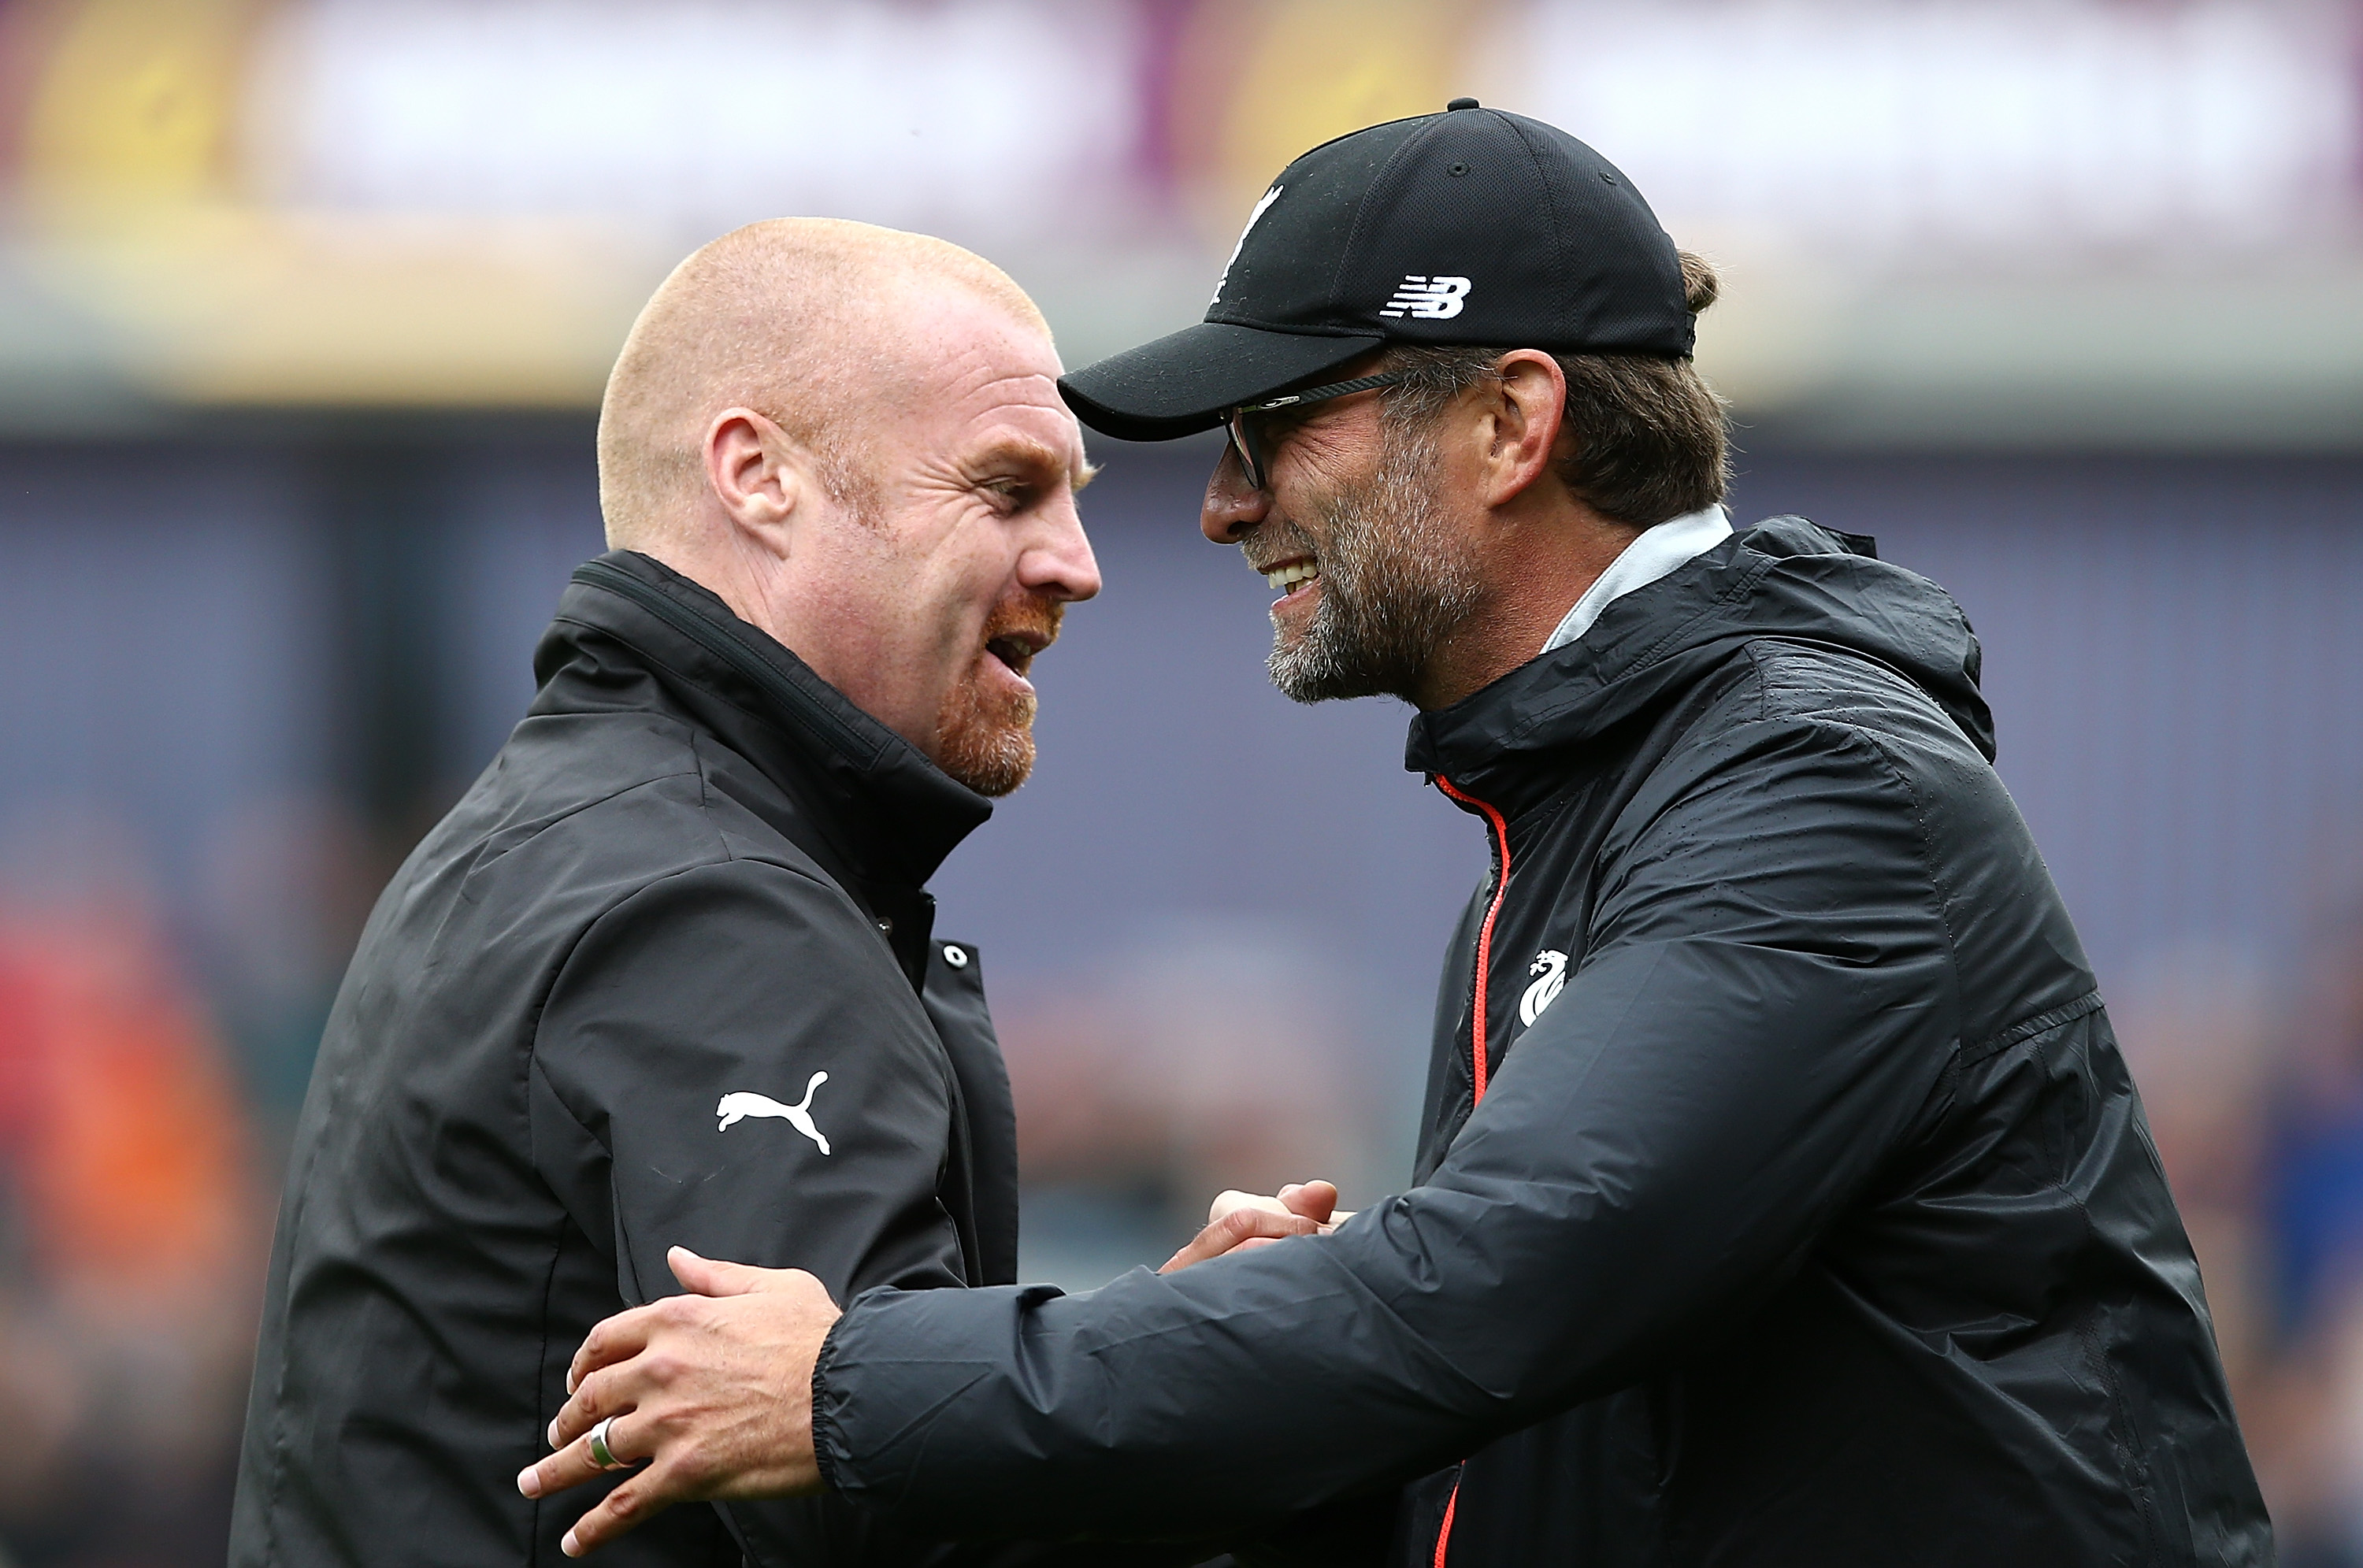 BURNLEY, ENGLAND - AUGUST 20:  Manager of Liverpool Jurgen Klopp and Sean Dyche, Manager of Burnley embrace ahead of kick off during the Premier League match between Burnley and Liverpool at Turf Moor on August 20, 2016 in Burnley, England.  (Photo by Jan Kruger/Getty Images)